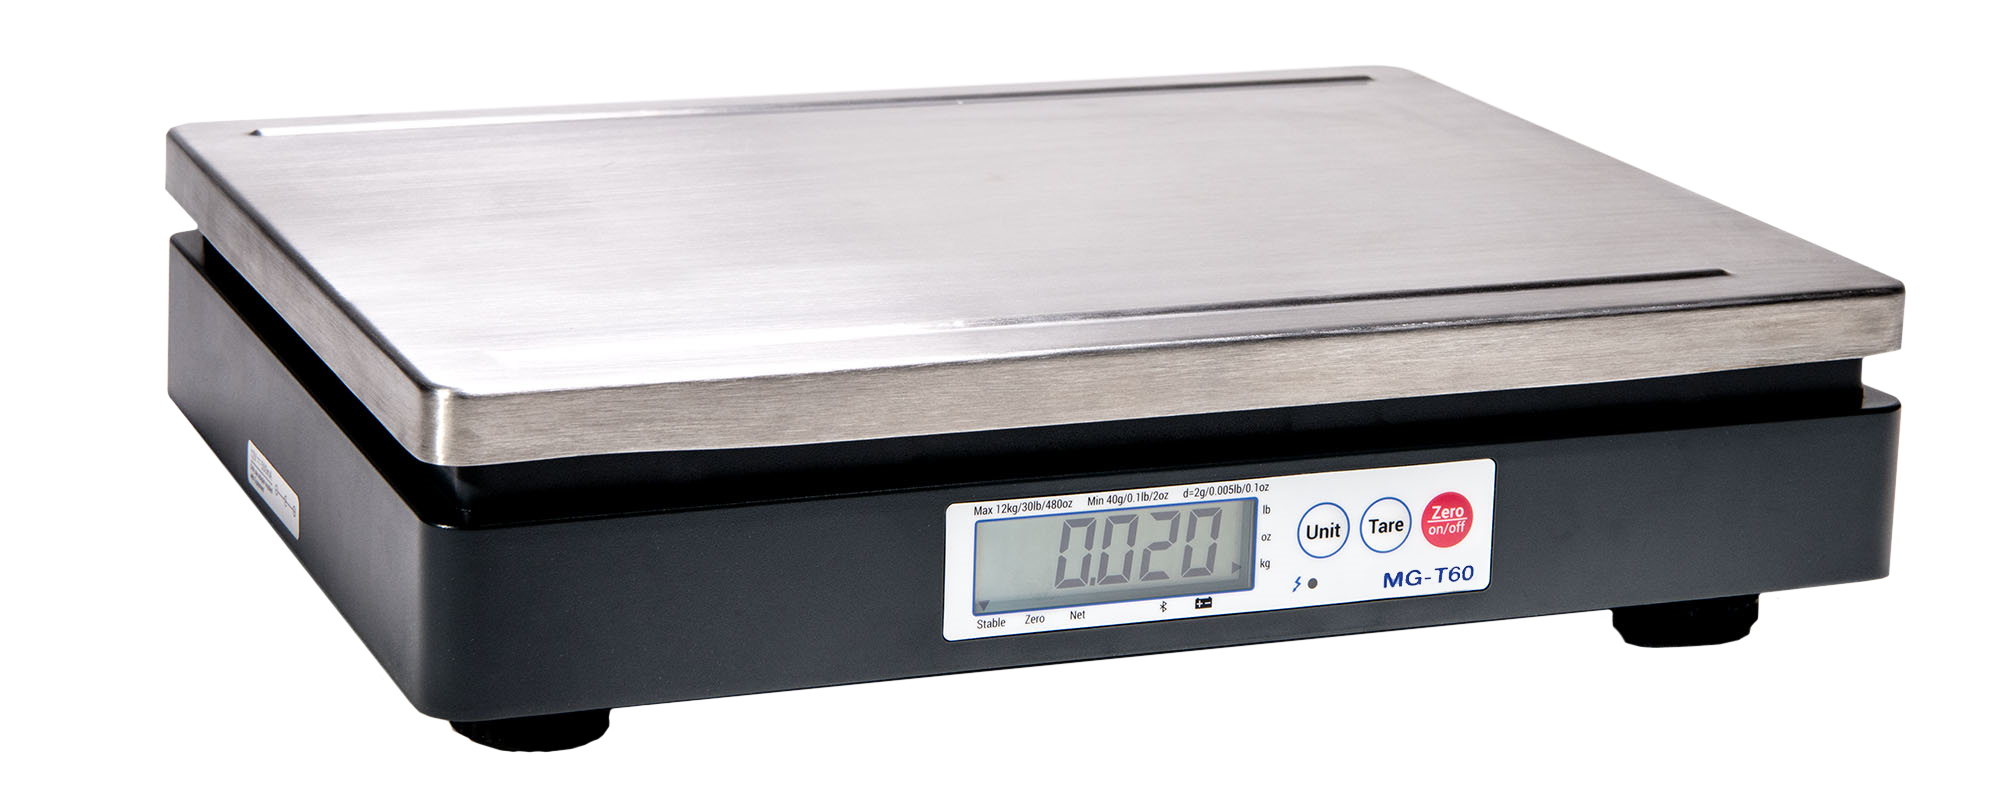 mG-T60 Point-of-sale Scale